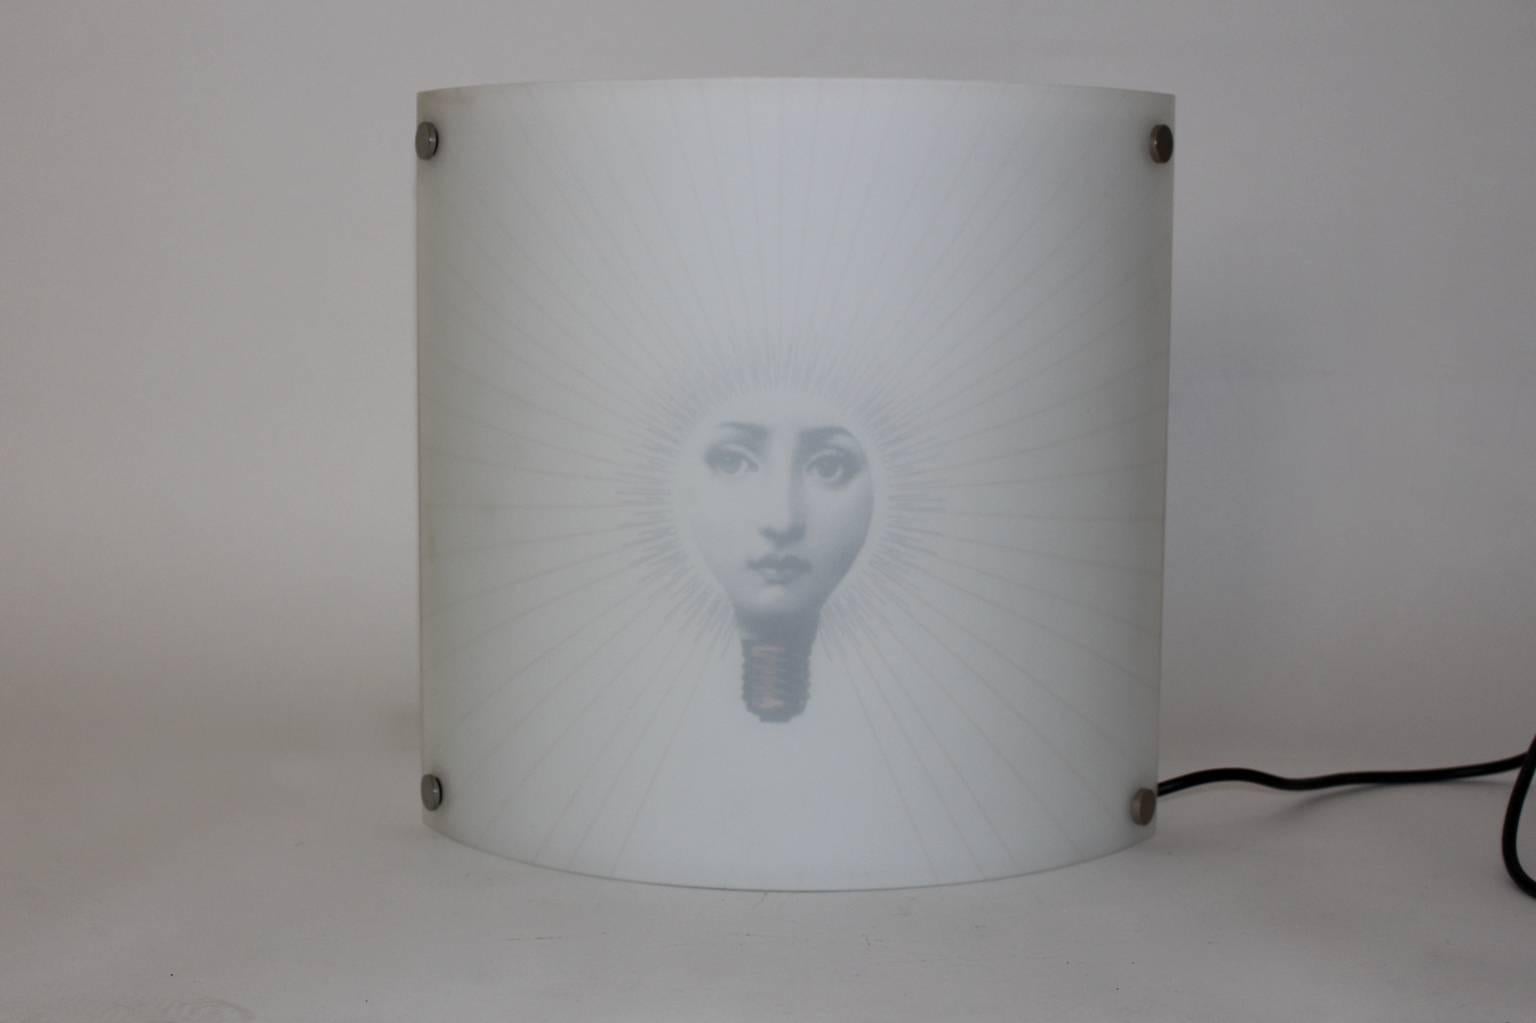 Wall Light printed with the face of Lina Cavalieri designed by Piero Fornasetti and produced by Anton Angeli, Italy 1980s.
You can use various color of bulbs, so it shines through the white glass front.

The surface is made of white etched glass,